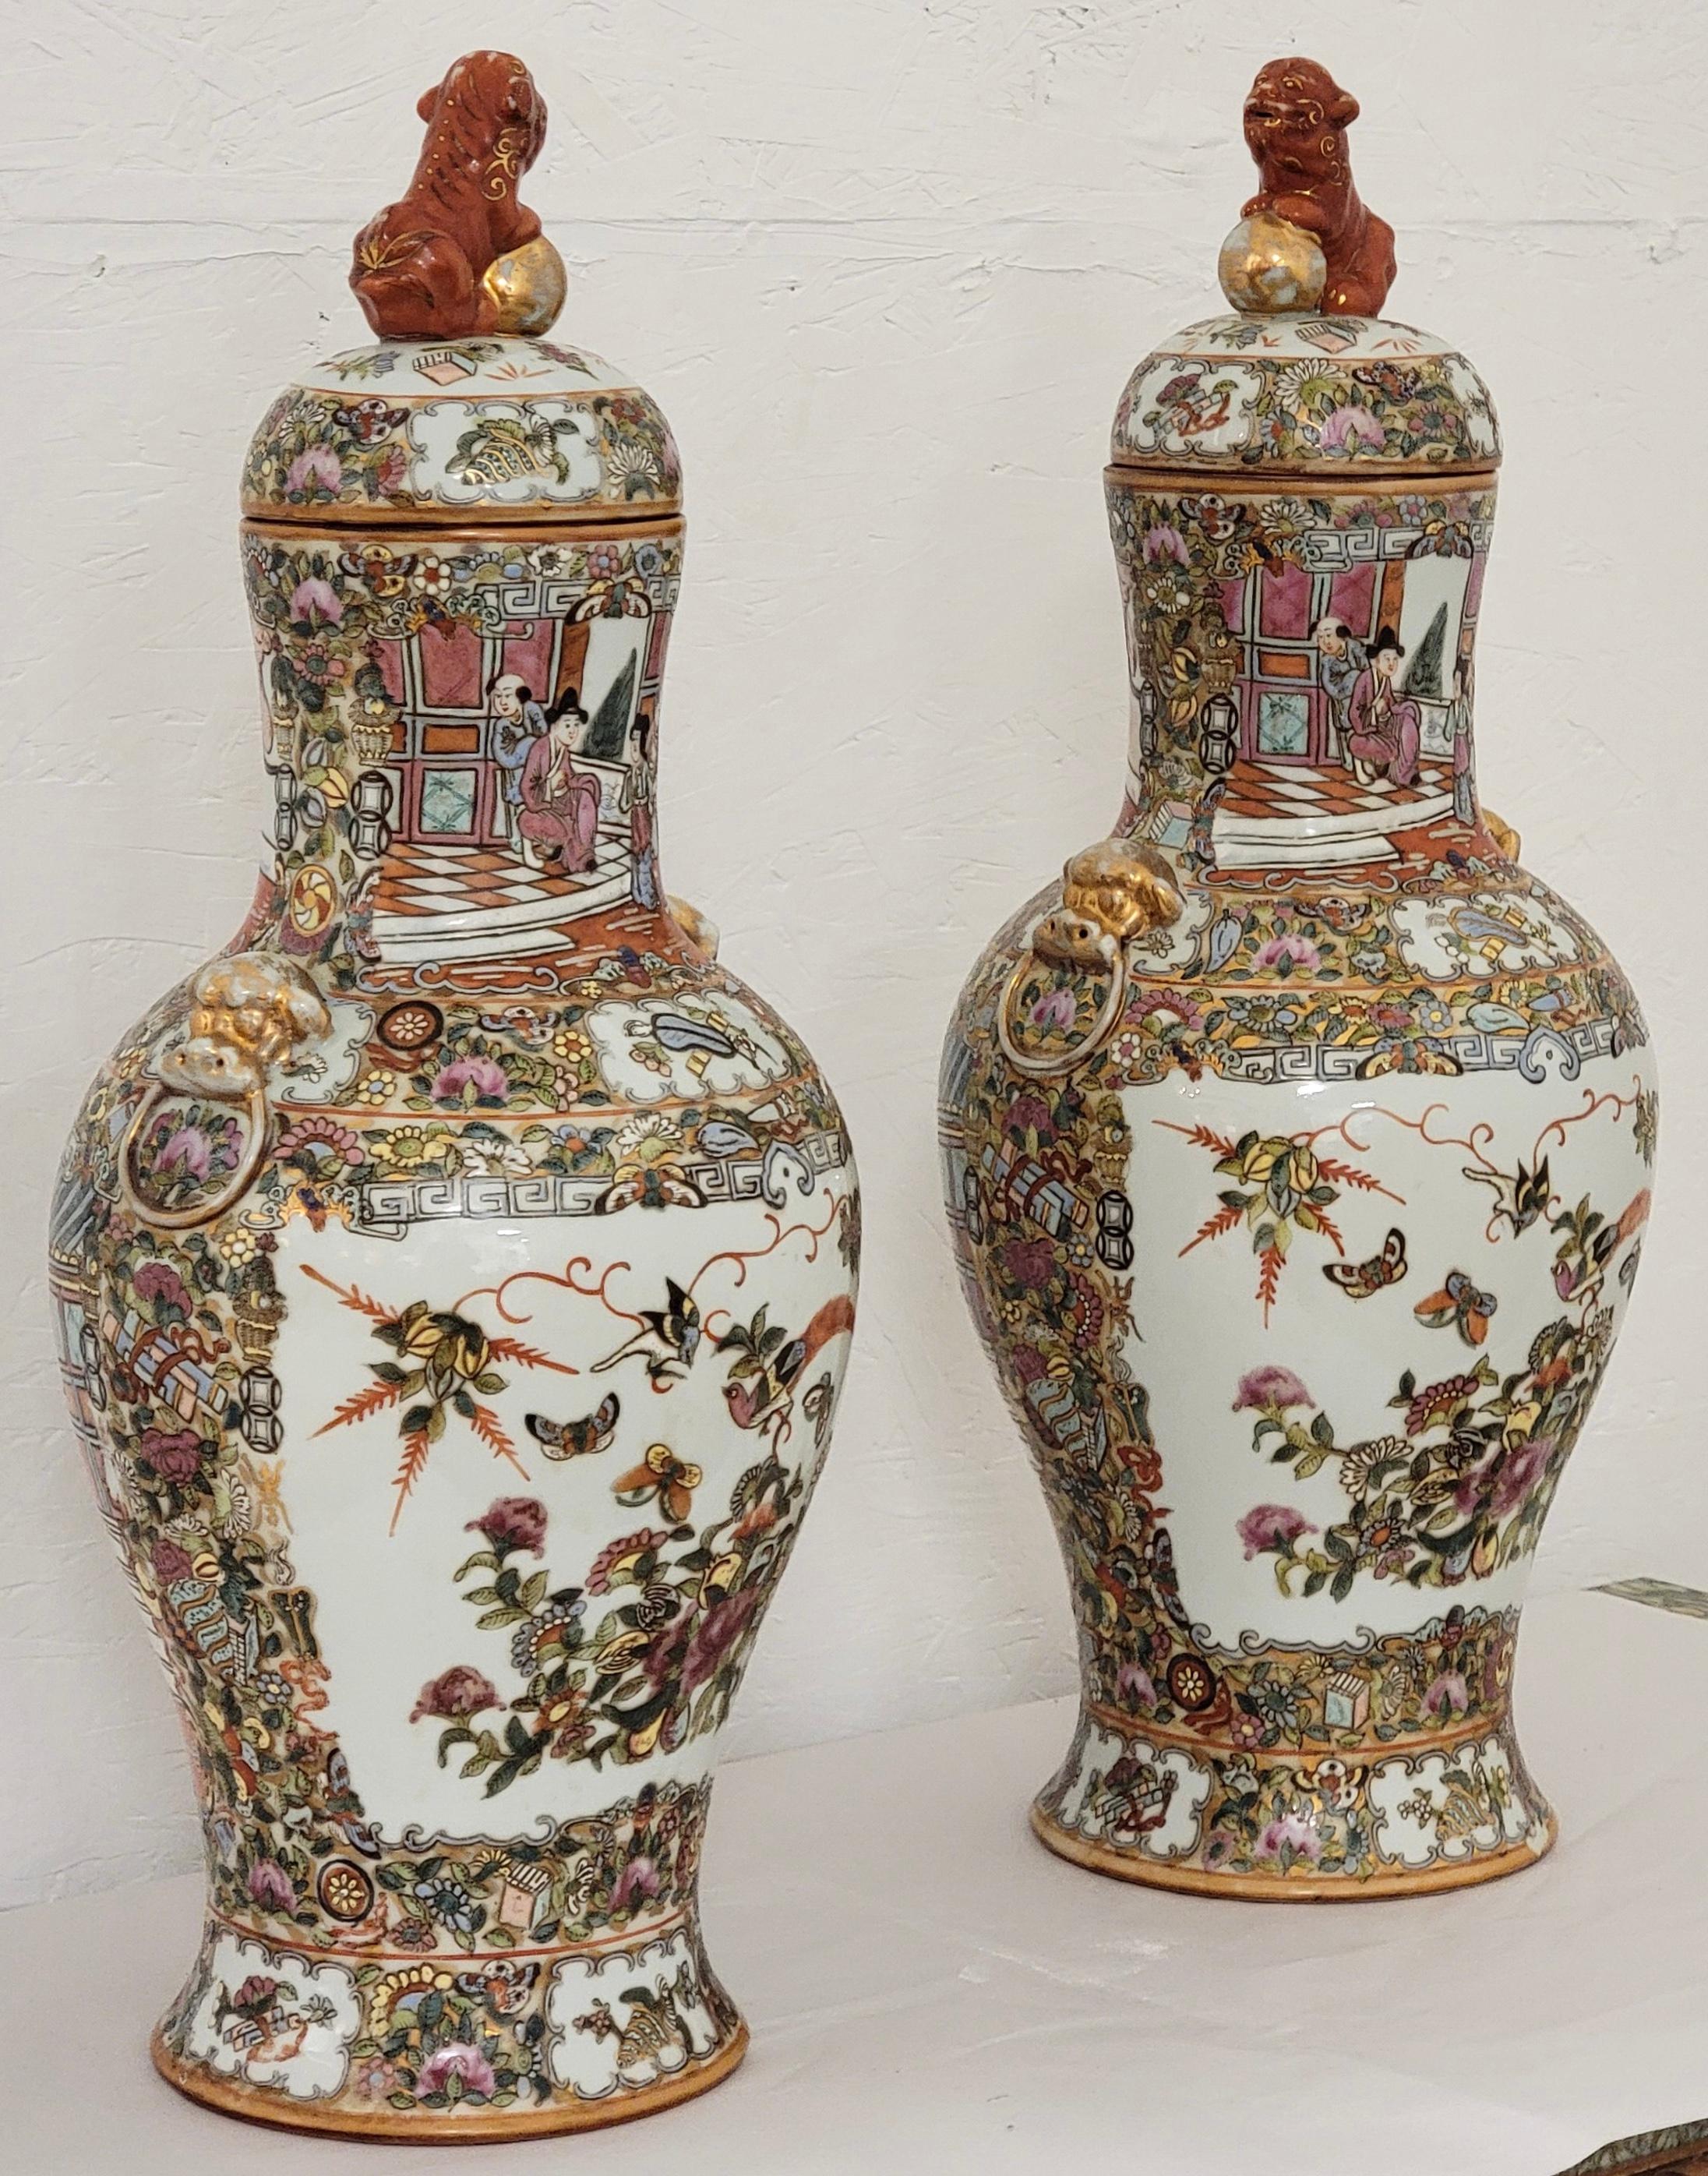 20th Century Mid-Century Asian Rose Famille Style Ginger Jars with Gilt Accents and Foo Dogs